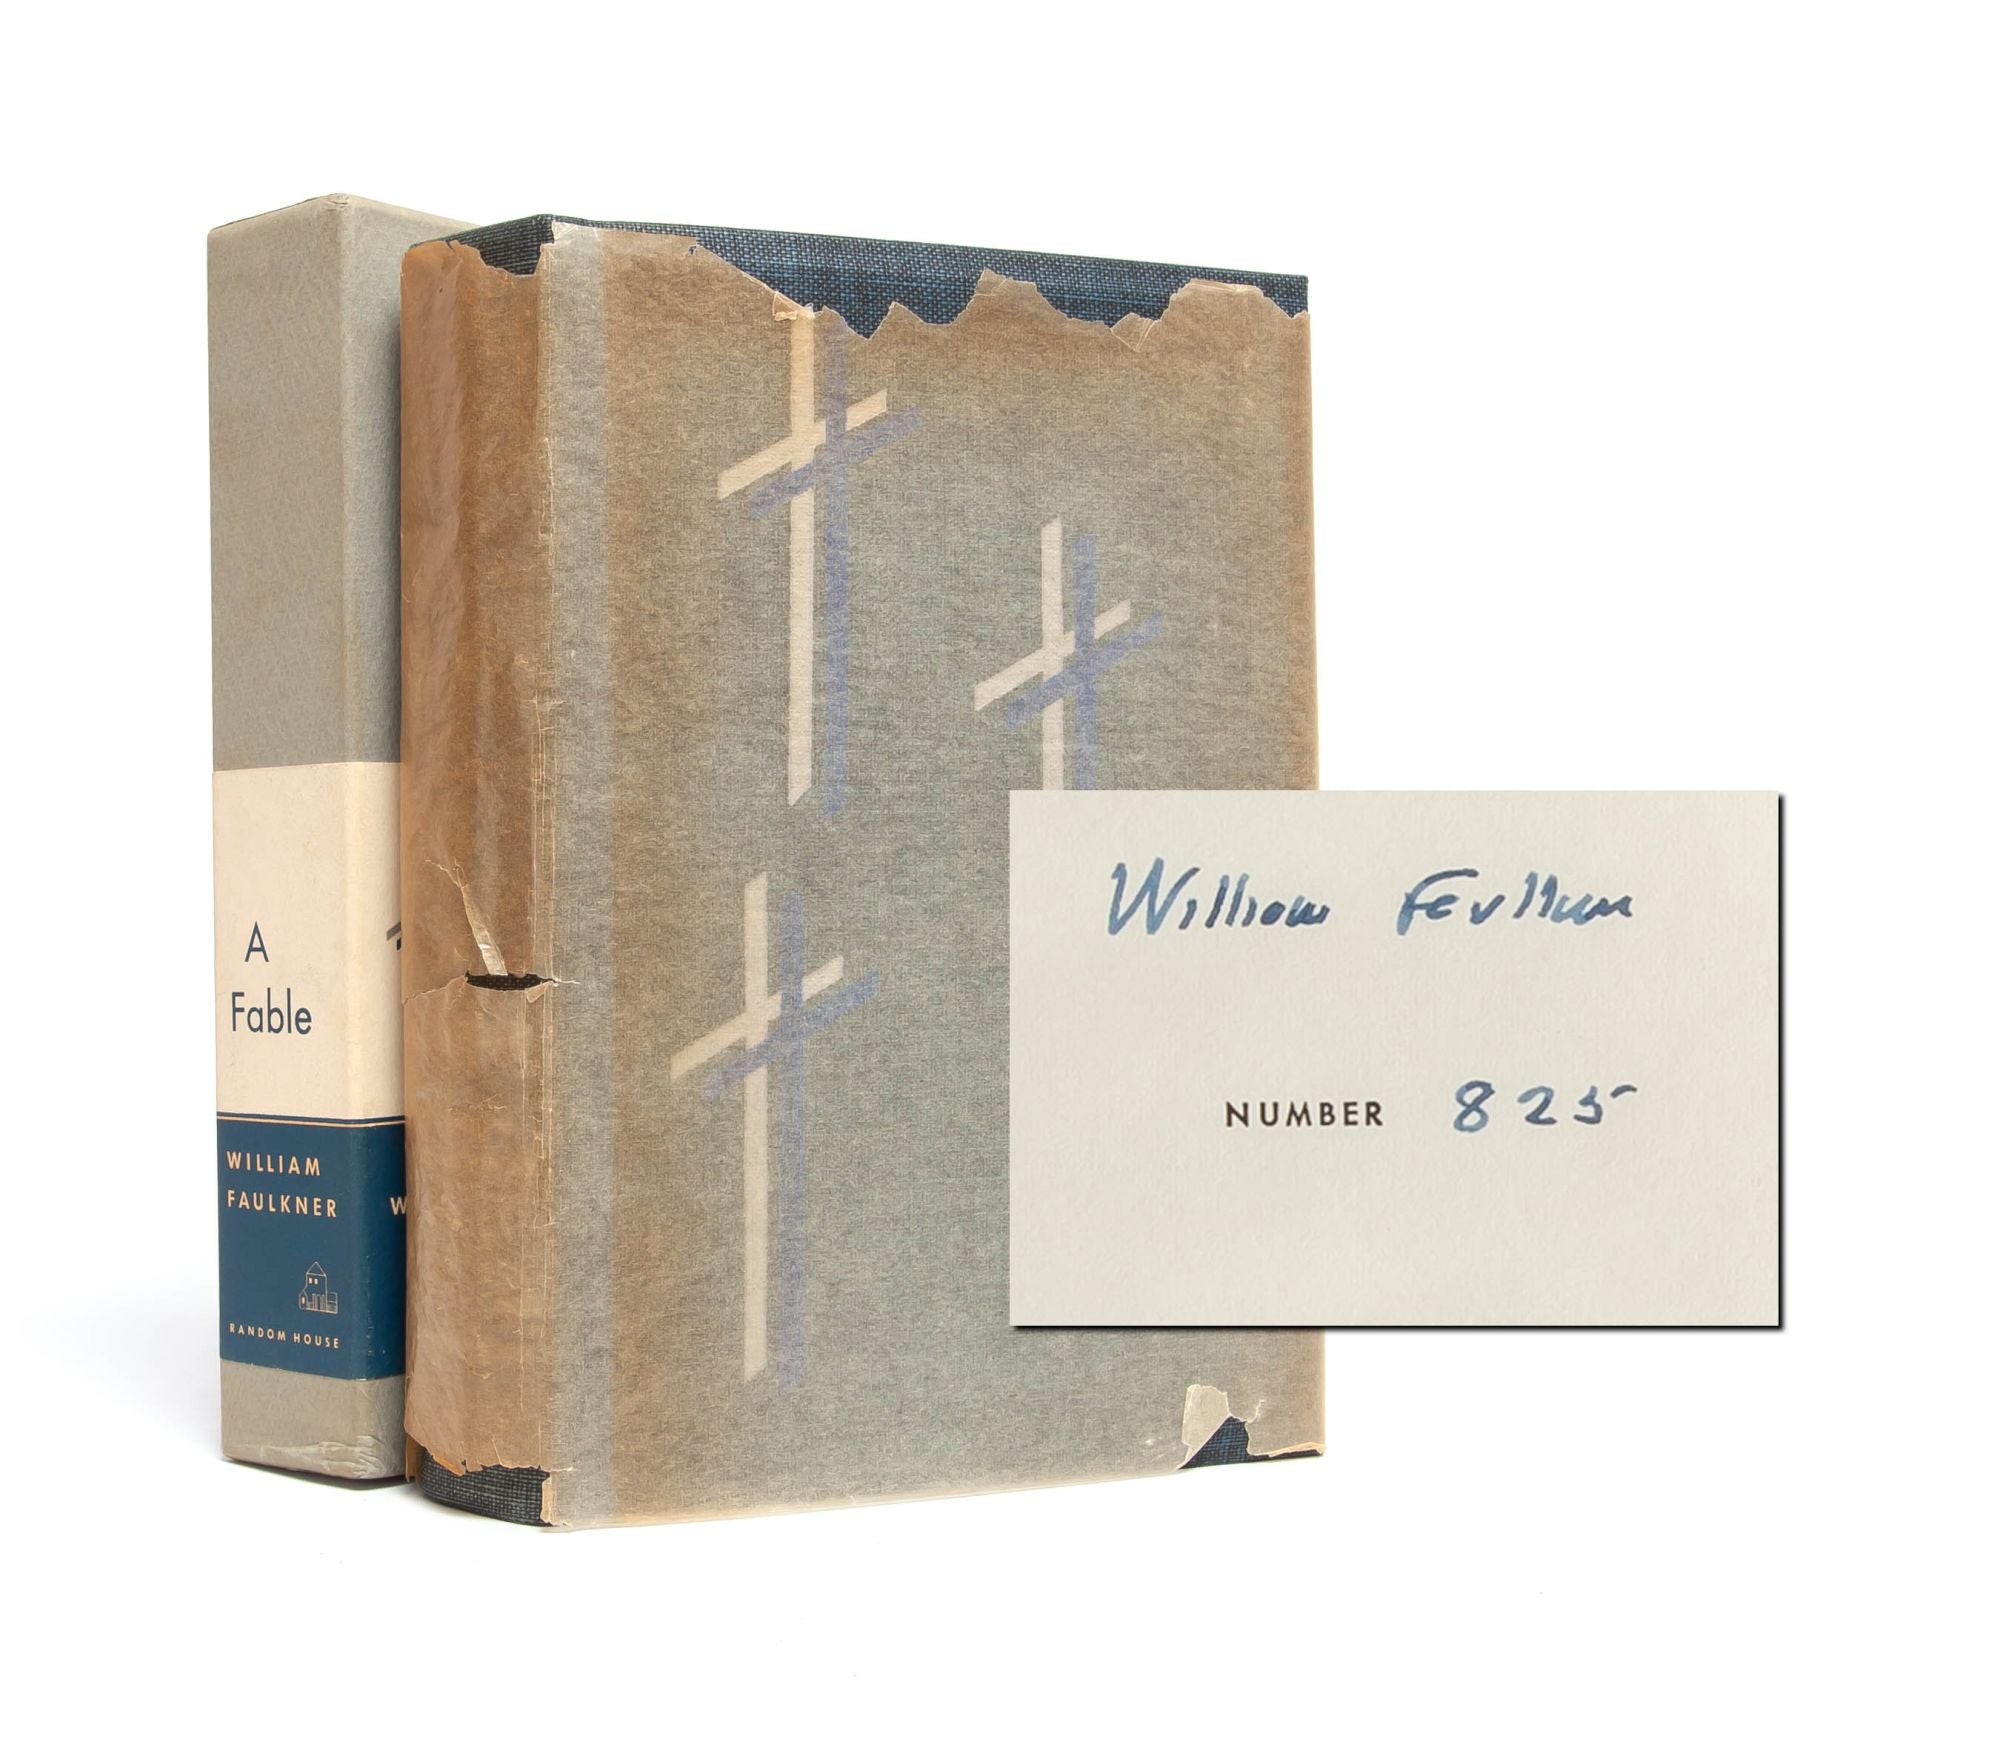 (Item #5305) A Fable (Signed limited edition). William Faulkner.